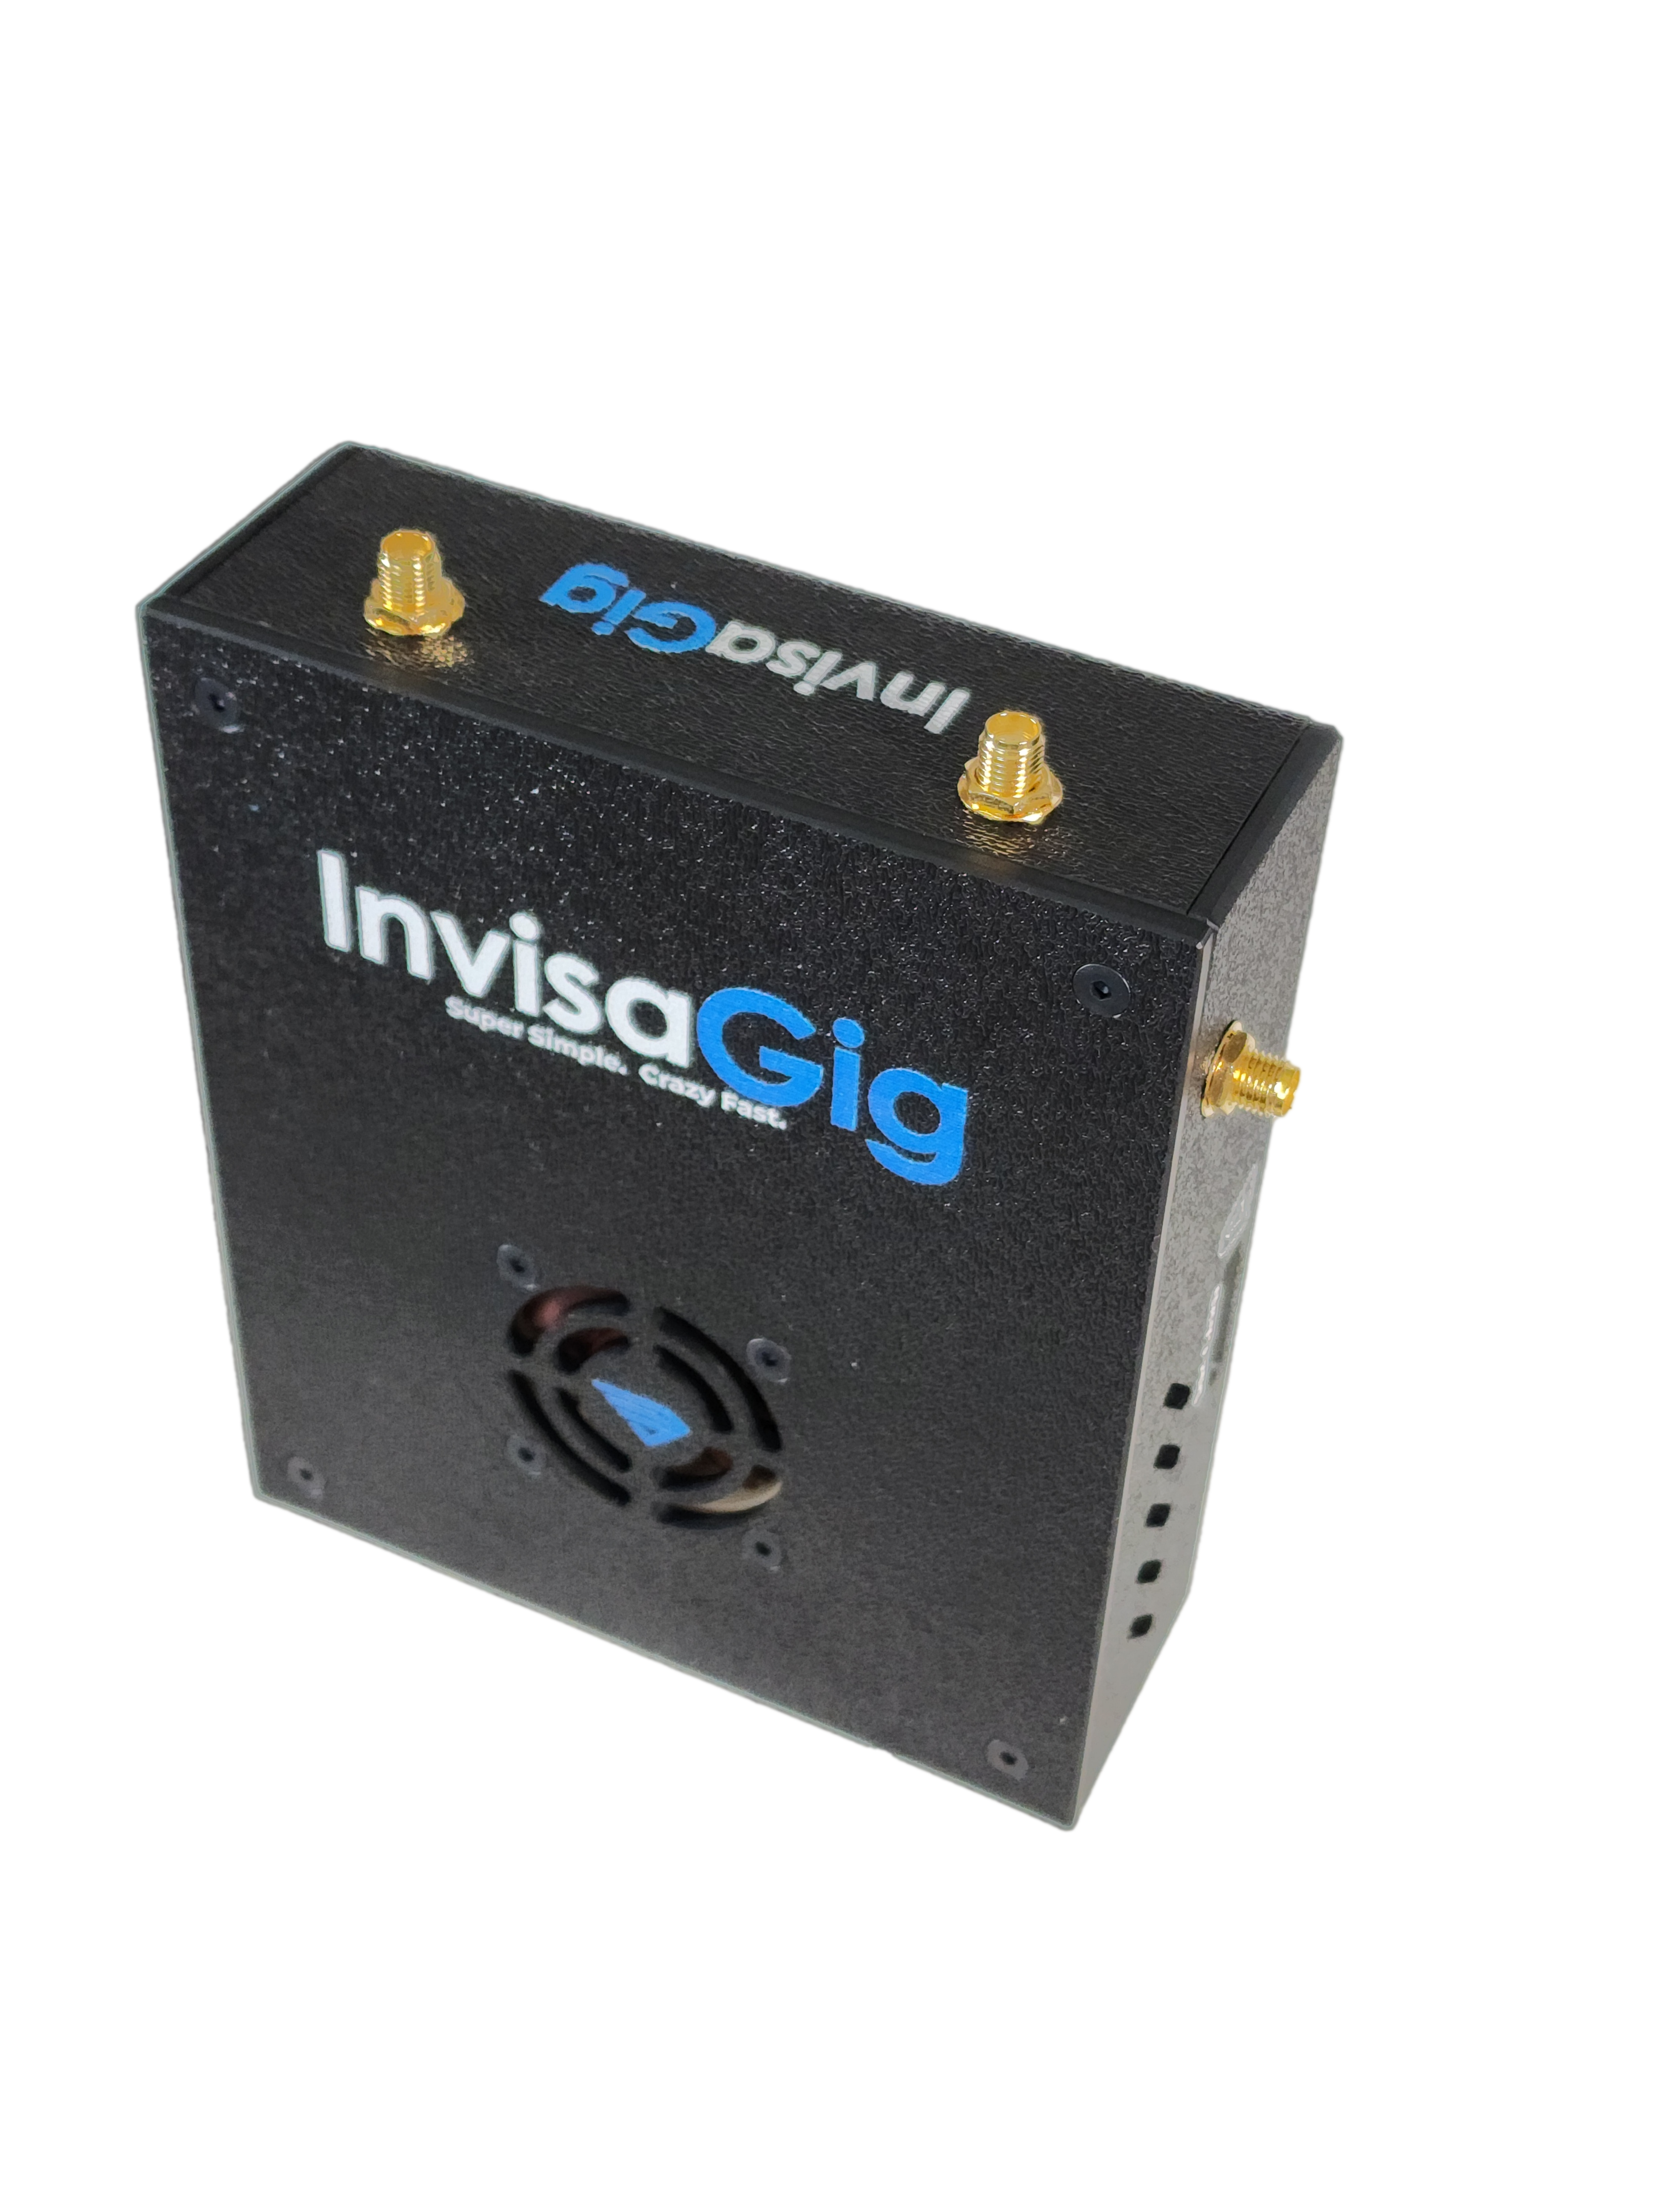 The InvisaGig - 5G Wireless High Speed Modem System - Super Simple, Crazy Fast